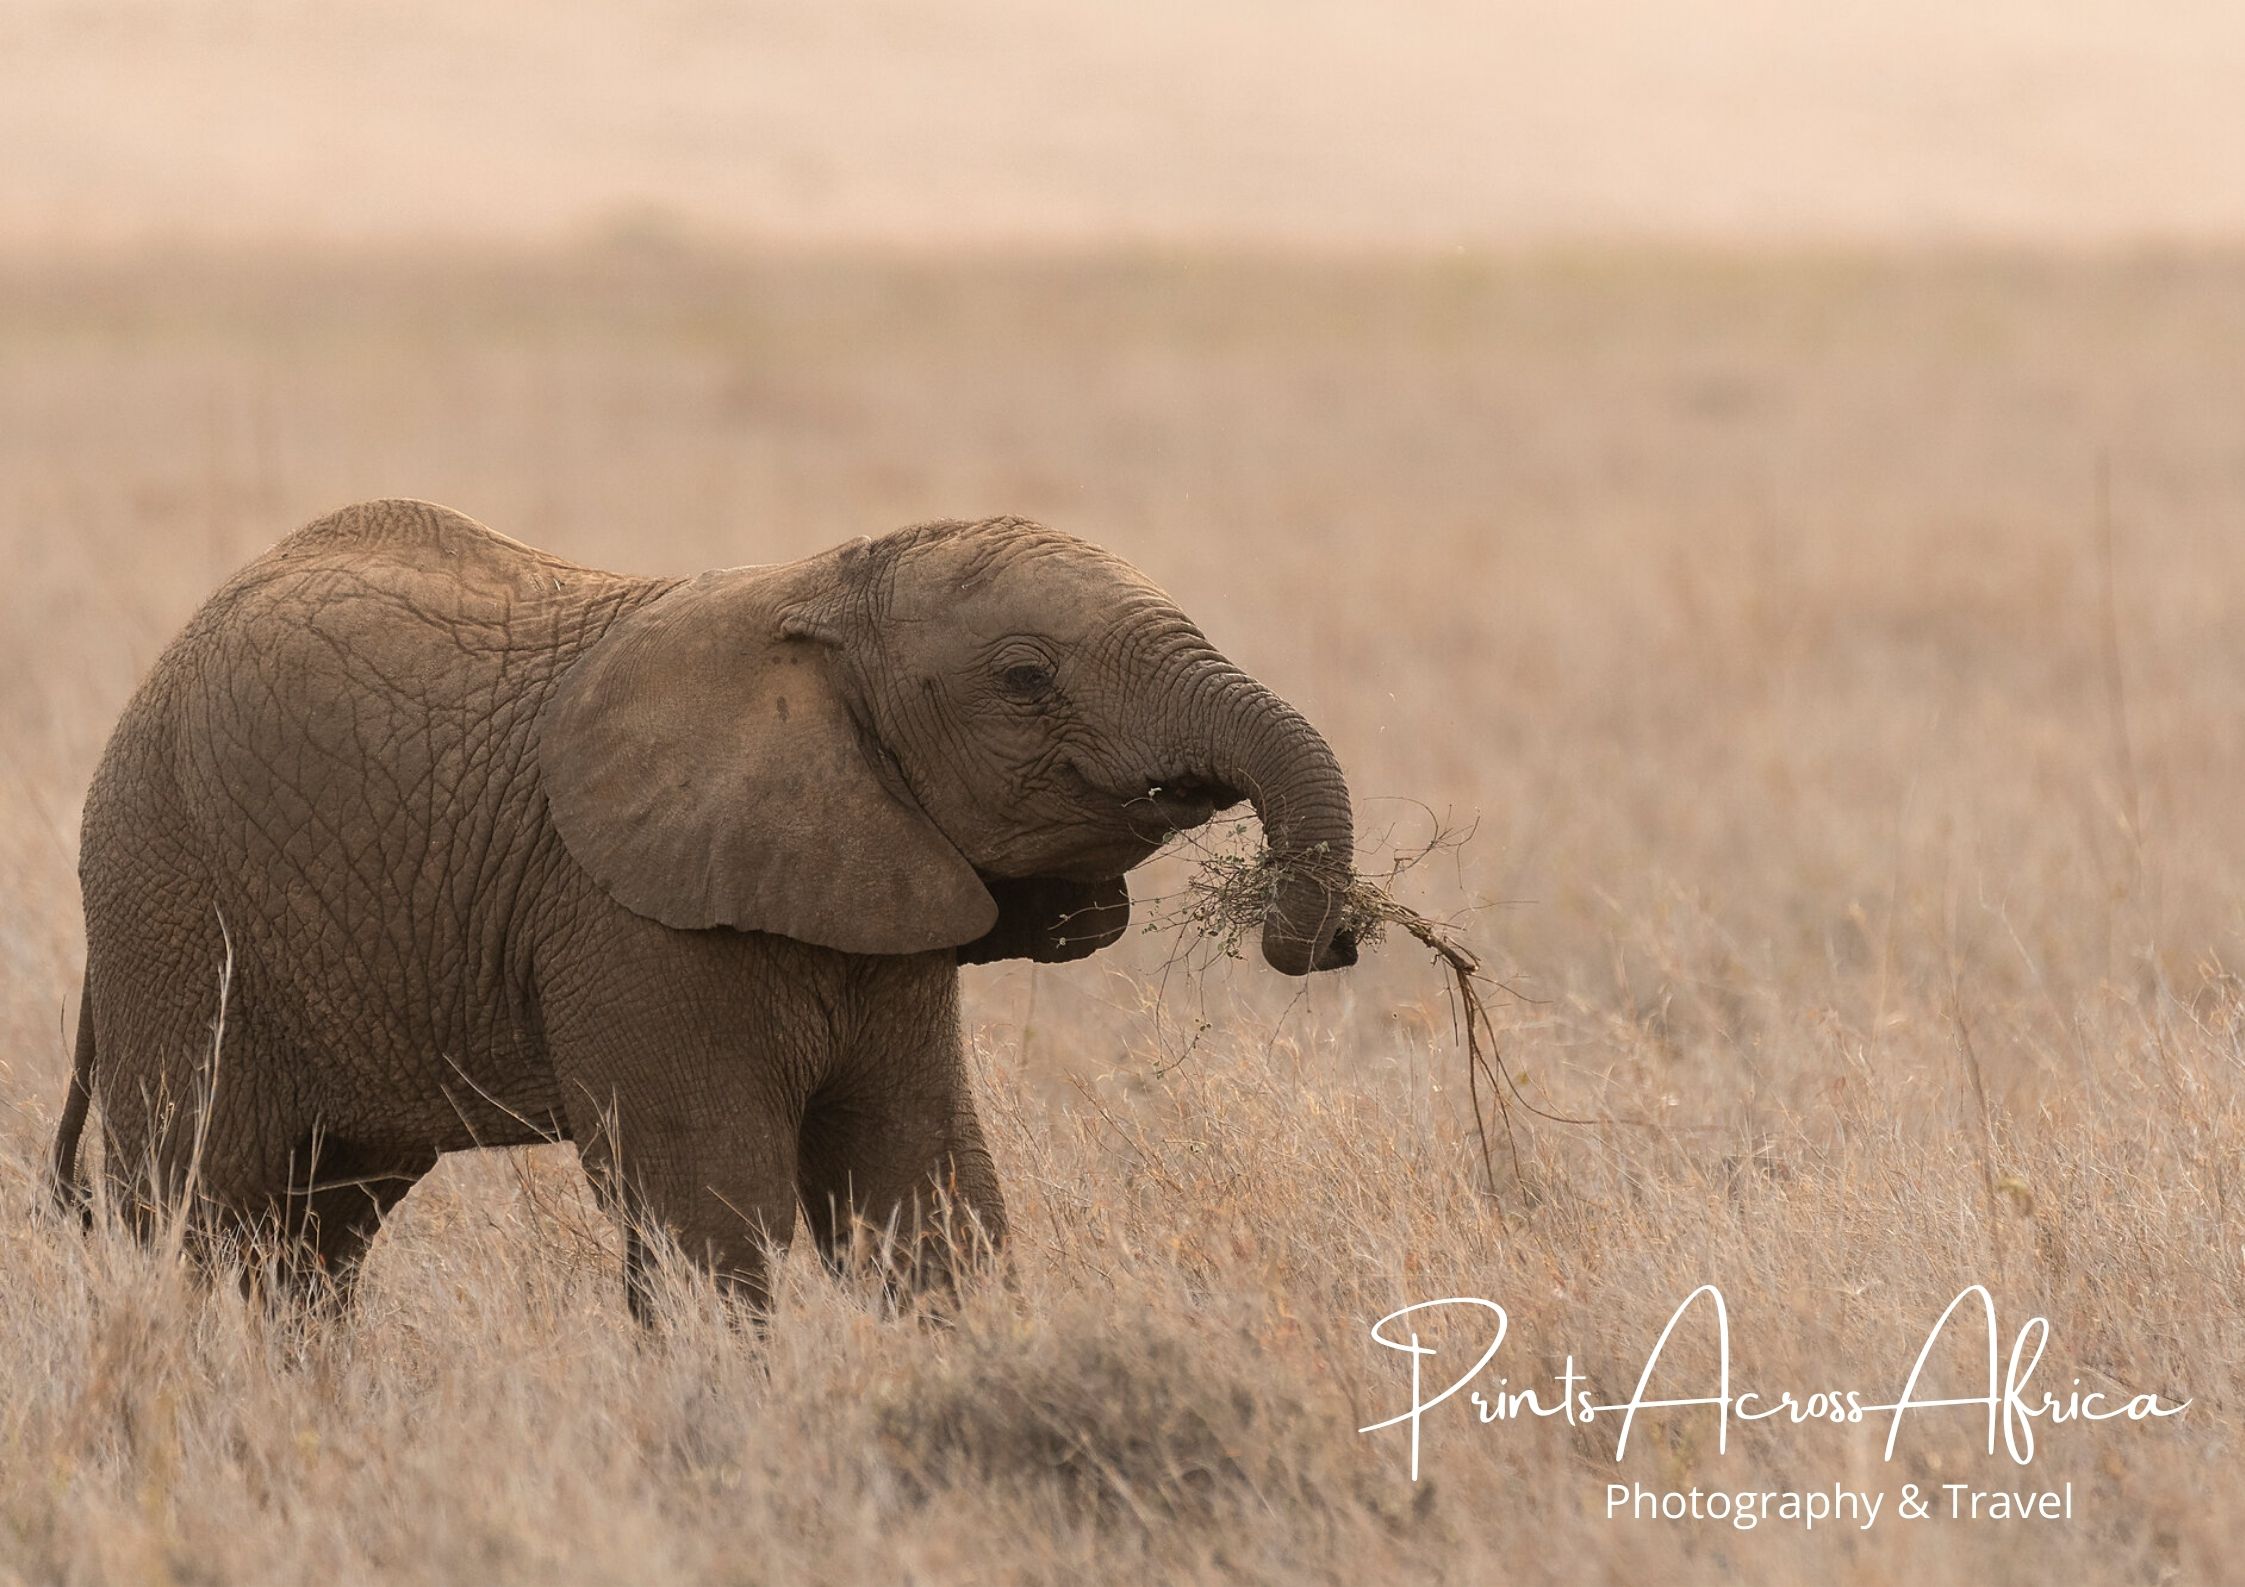 A young elephant playing with a stick